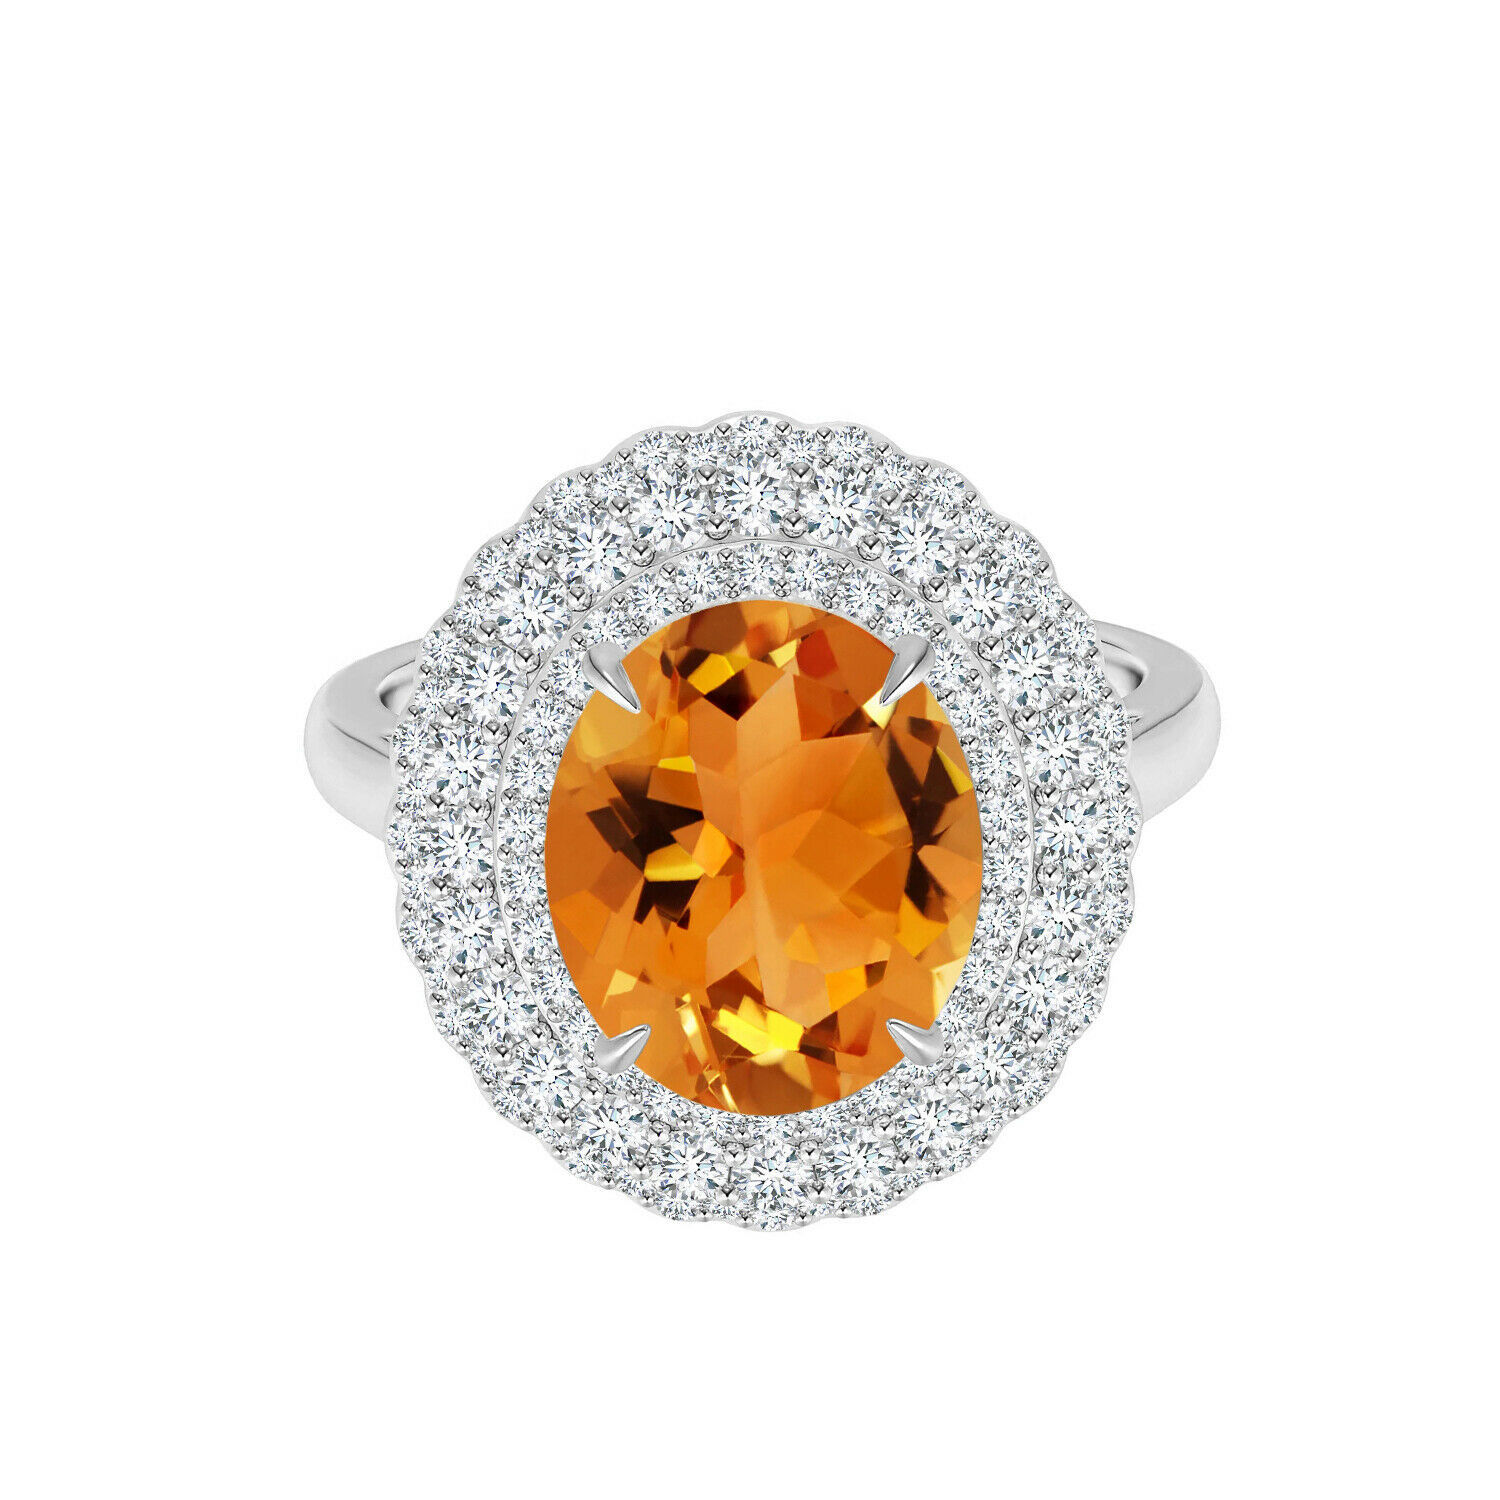 1.0 Cts Oval Citrine Cocktail Ring with Triple Solitaire Accents 10K White Gold